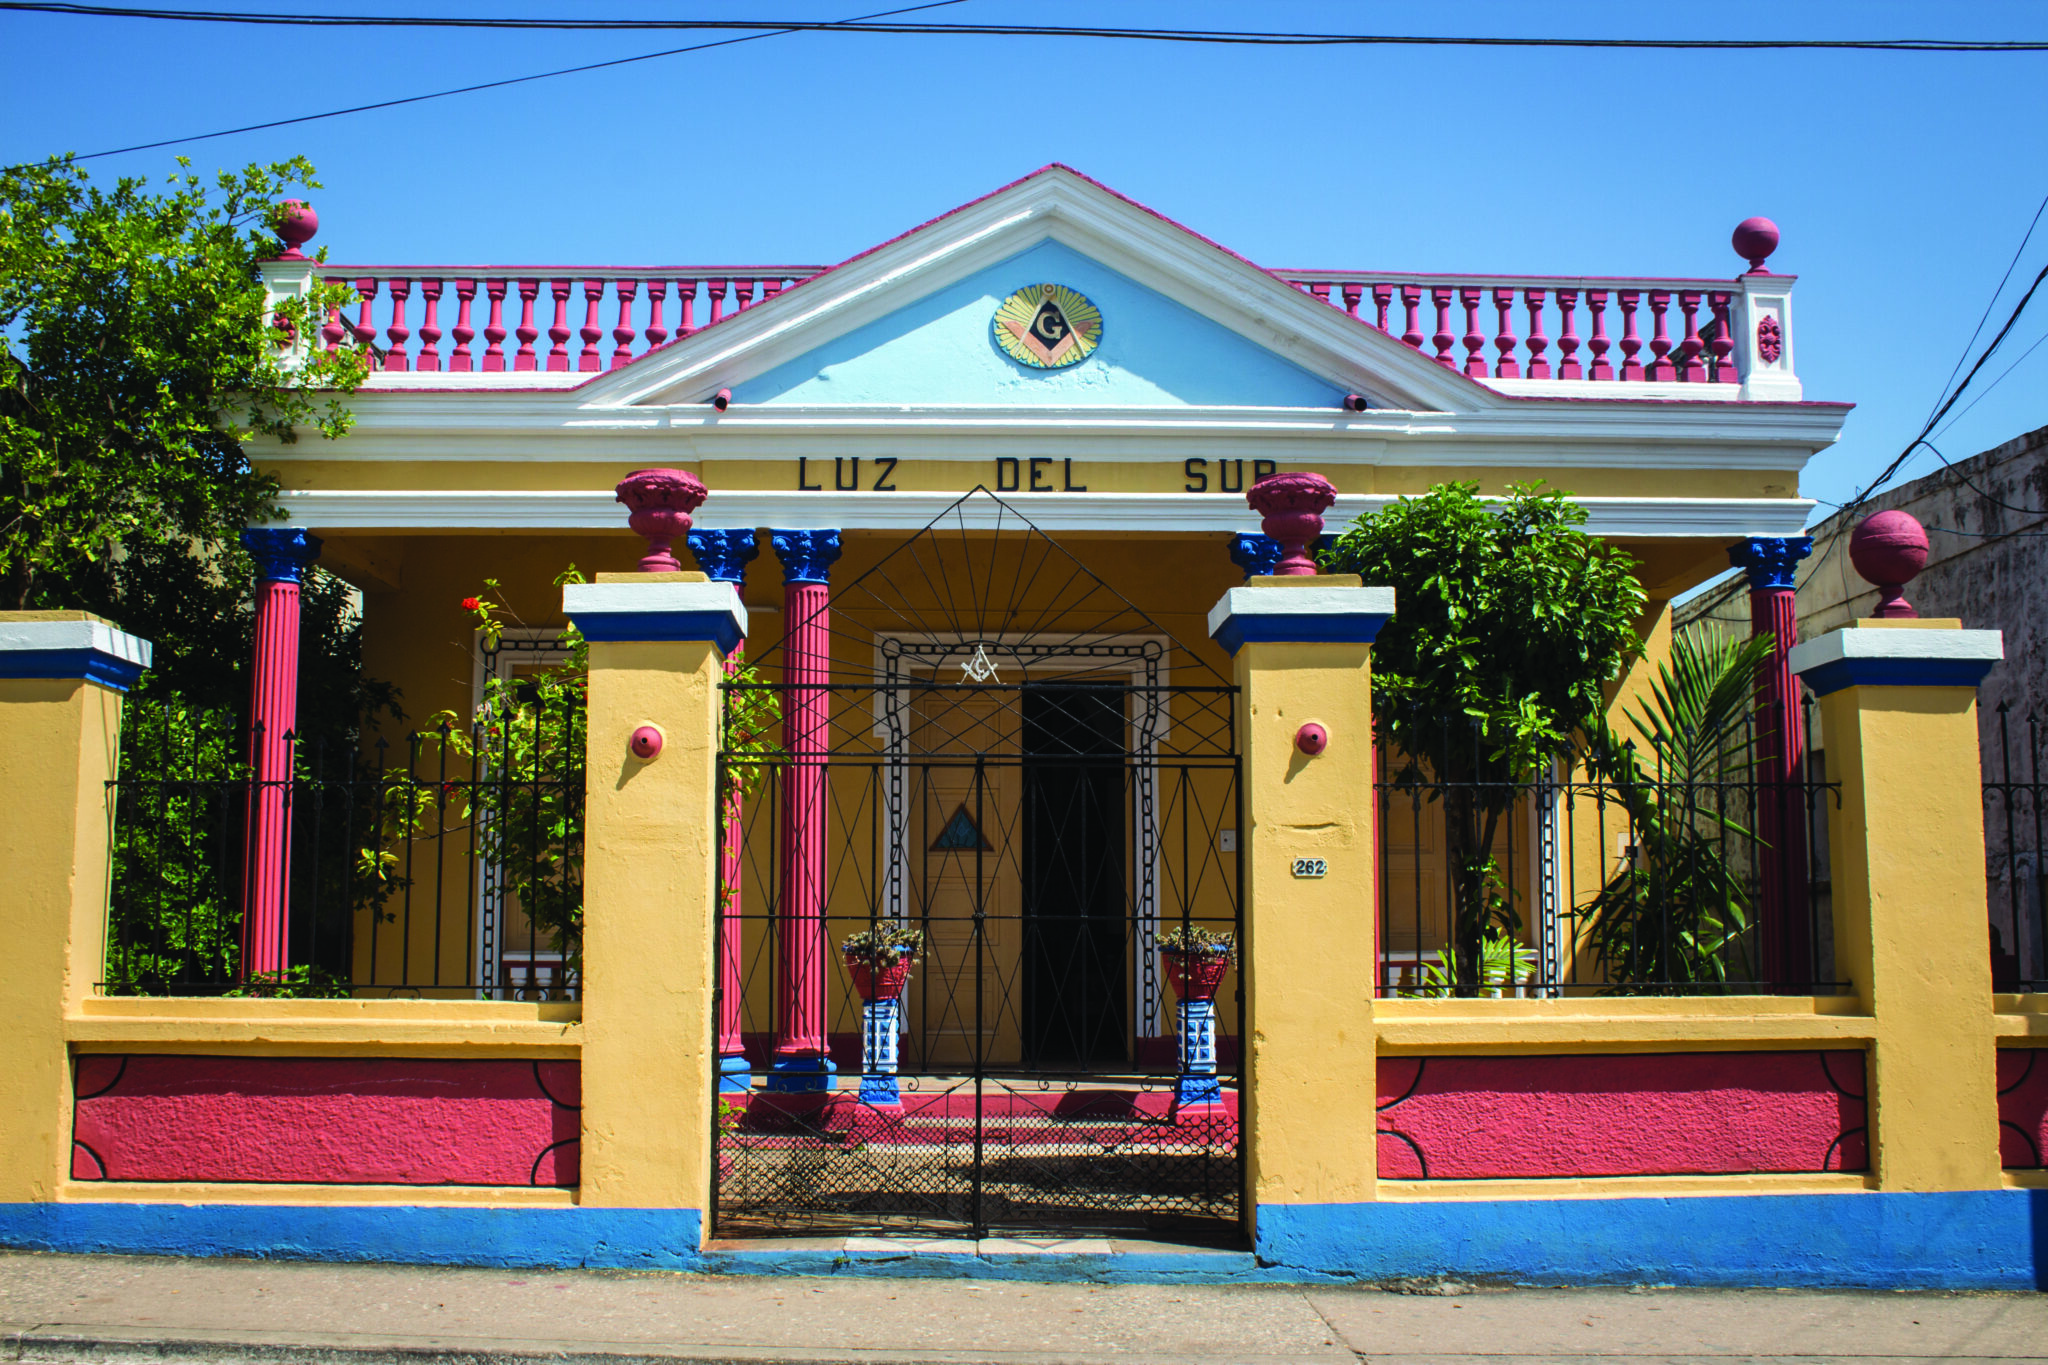 Logia Luz Del Sur in Cuba. Despite its communist history, Cuba is home to a thriving Masonic community with many colorful lodges.